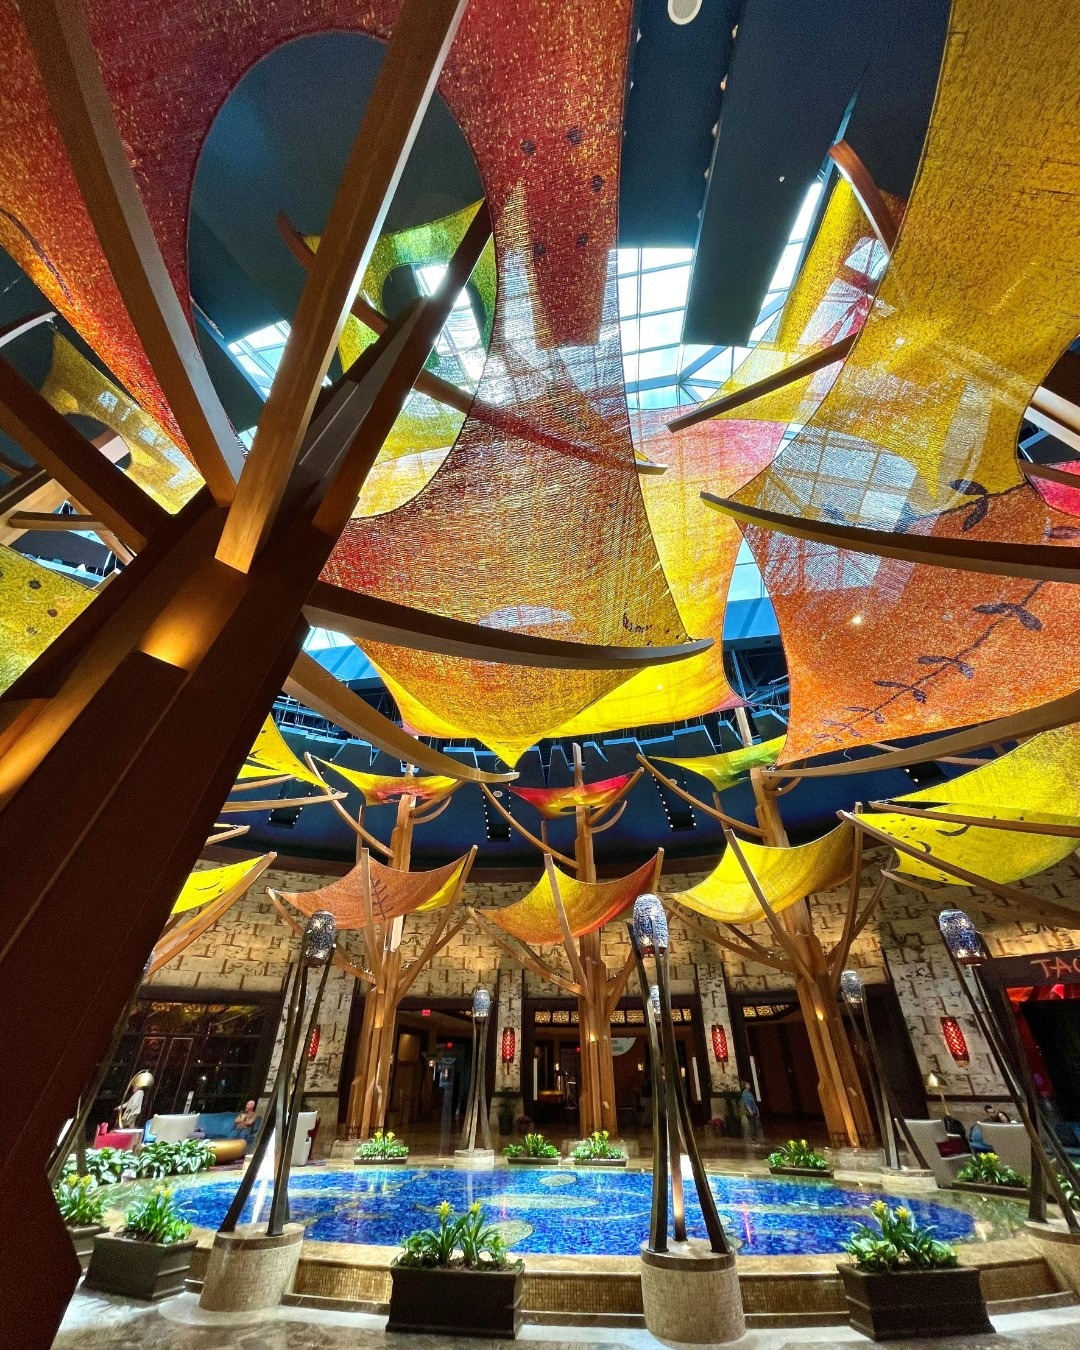 One of the indoor pools at Mohegan Sun Casino & Resort. A series of transparent red and yellow cloths made to look like tree leaves filter light from a glass atrium.